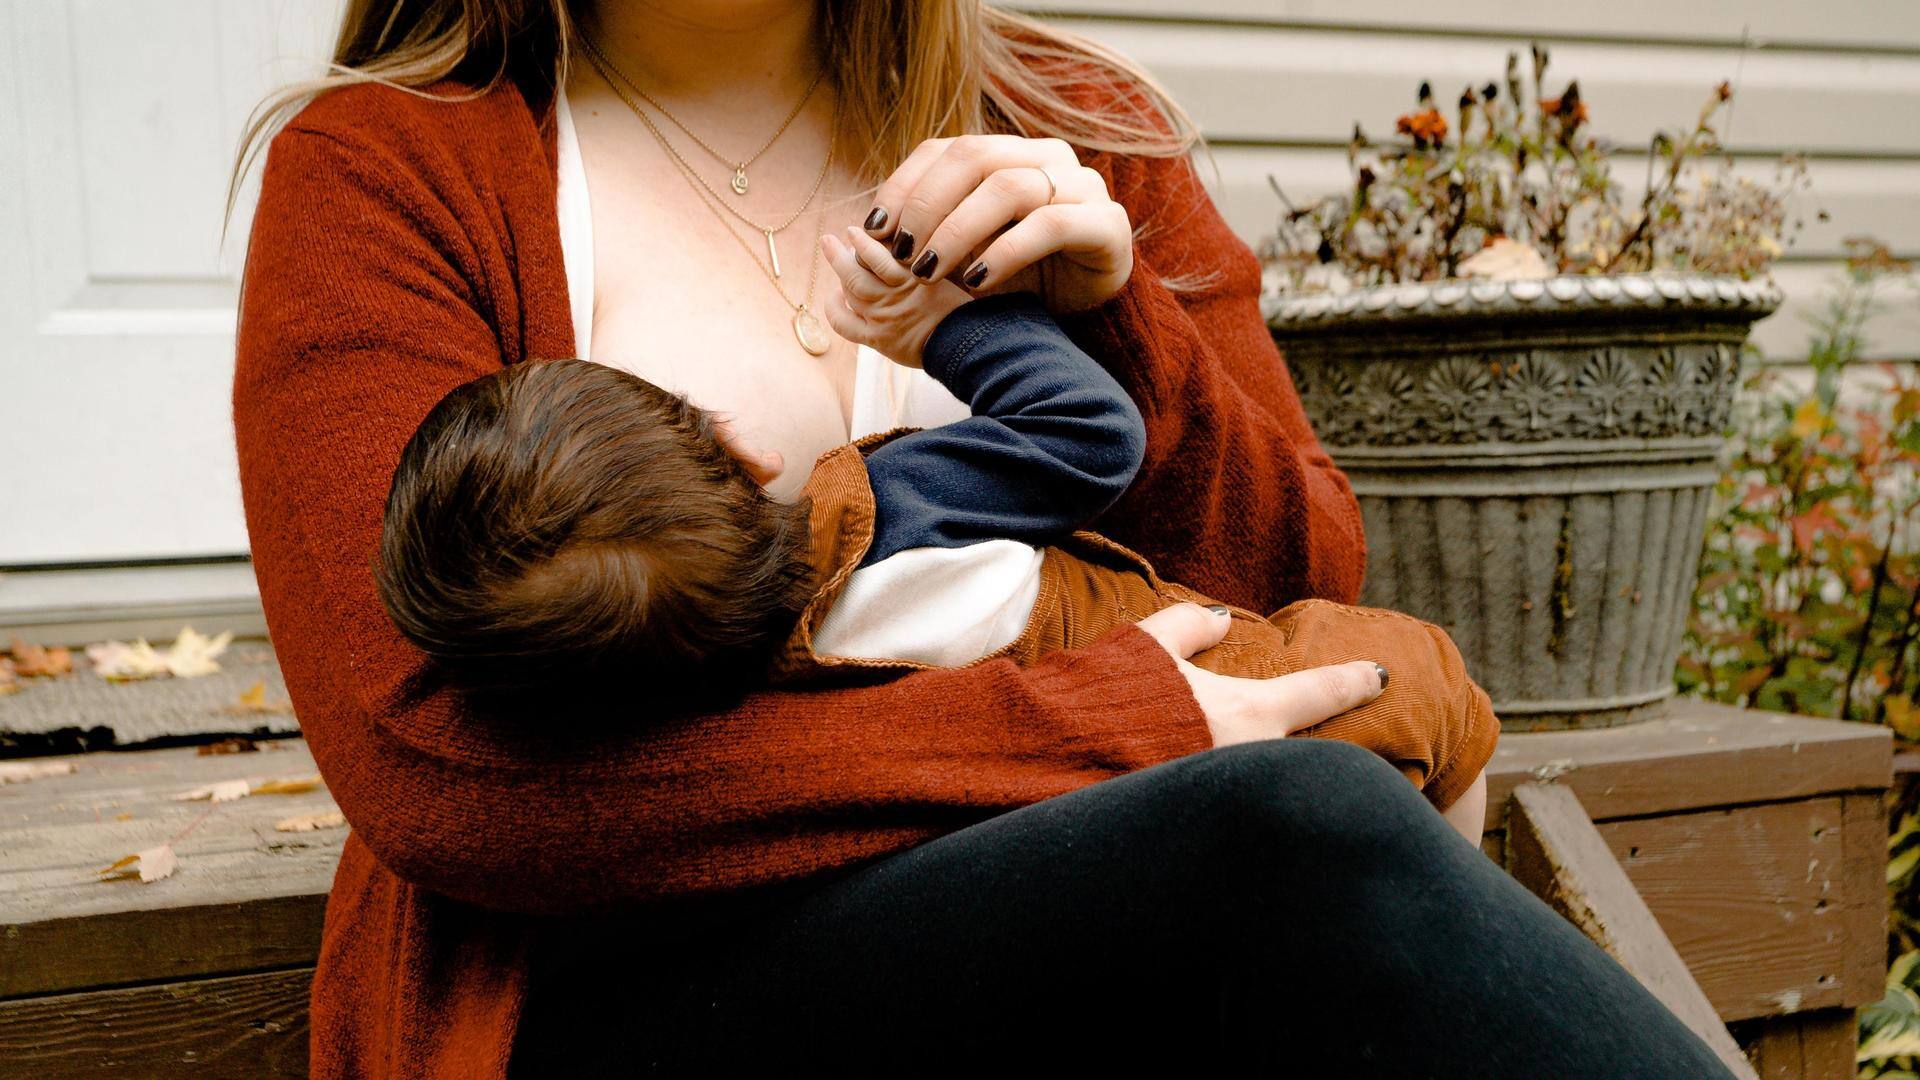 Australia: Judge removes breastfeeding mother, baby from courtroom; faces criticism